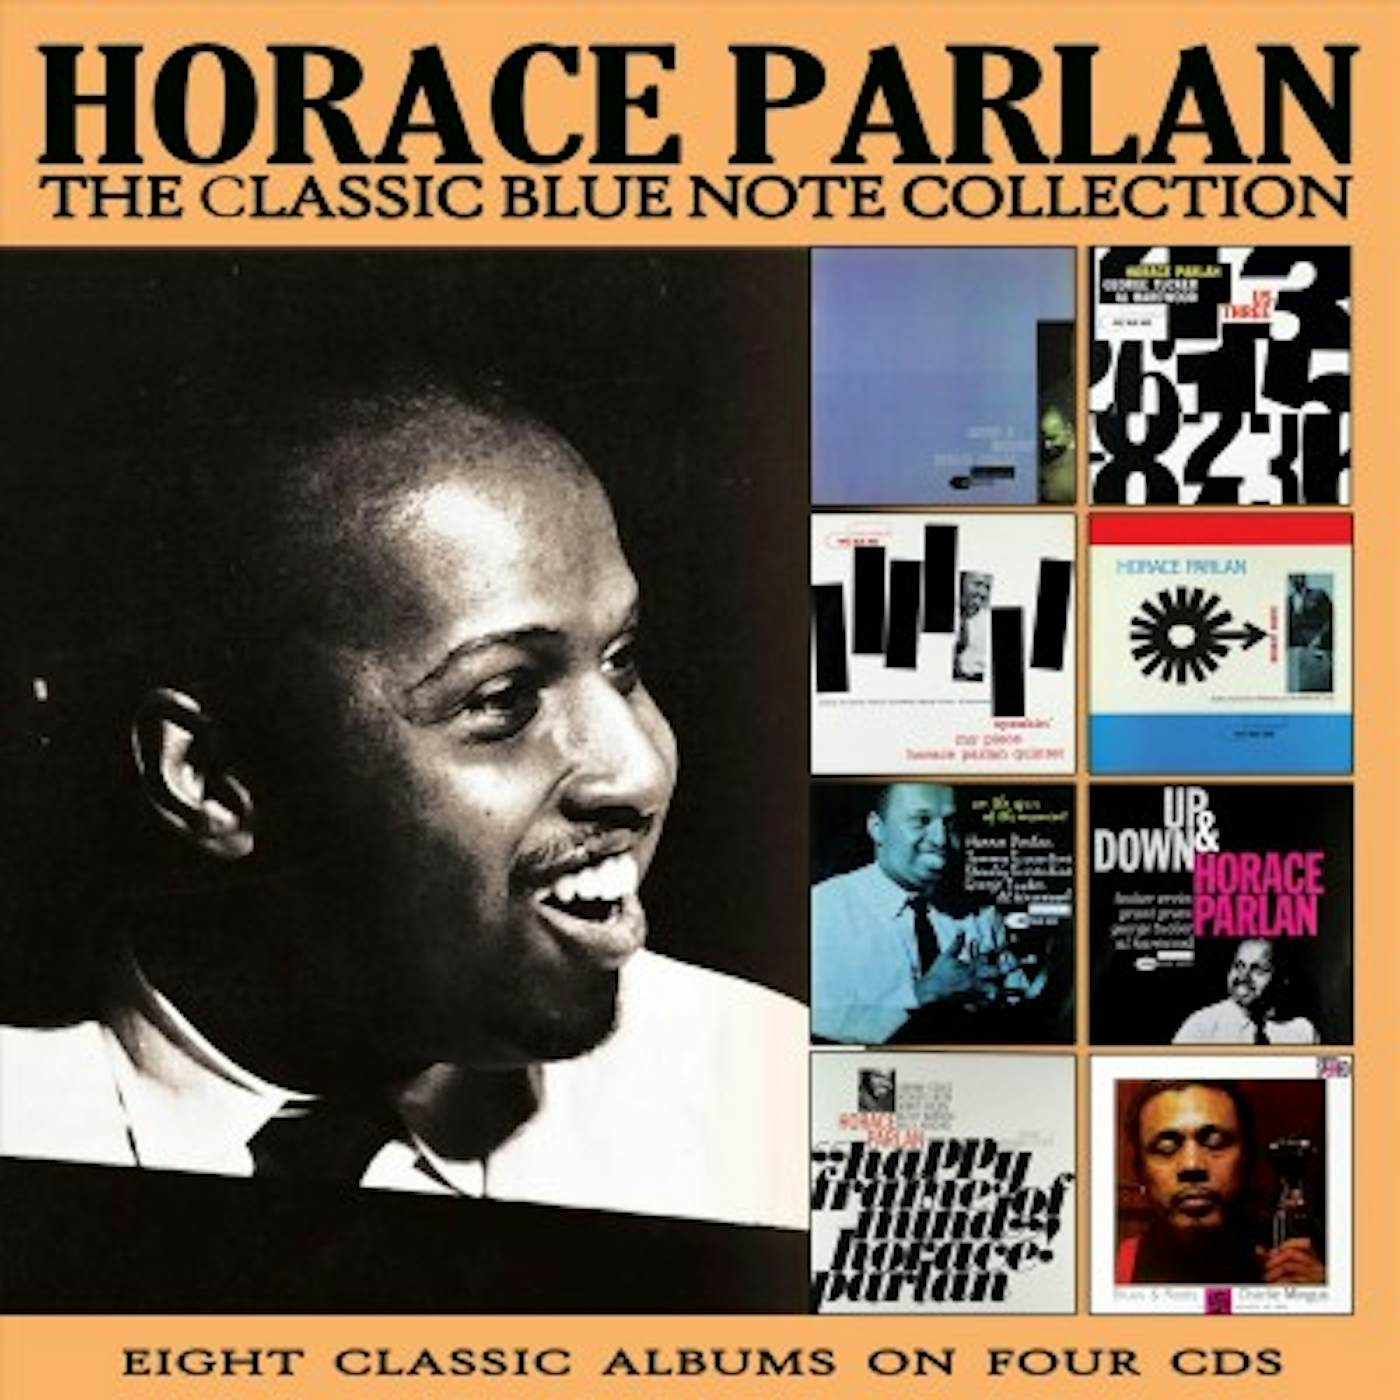 Horace Parlan CLASSIC BLUE NOTE COLLECTION CD